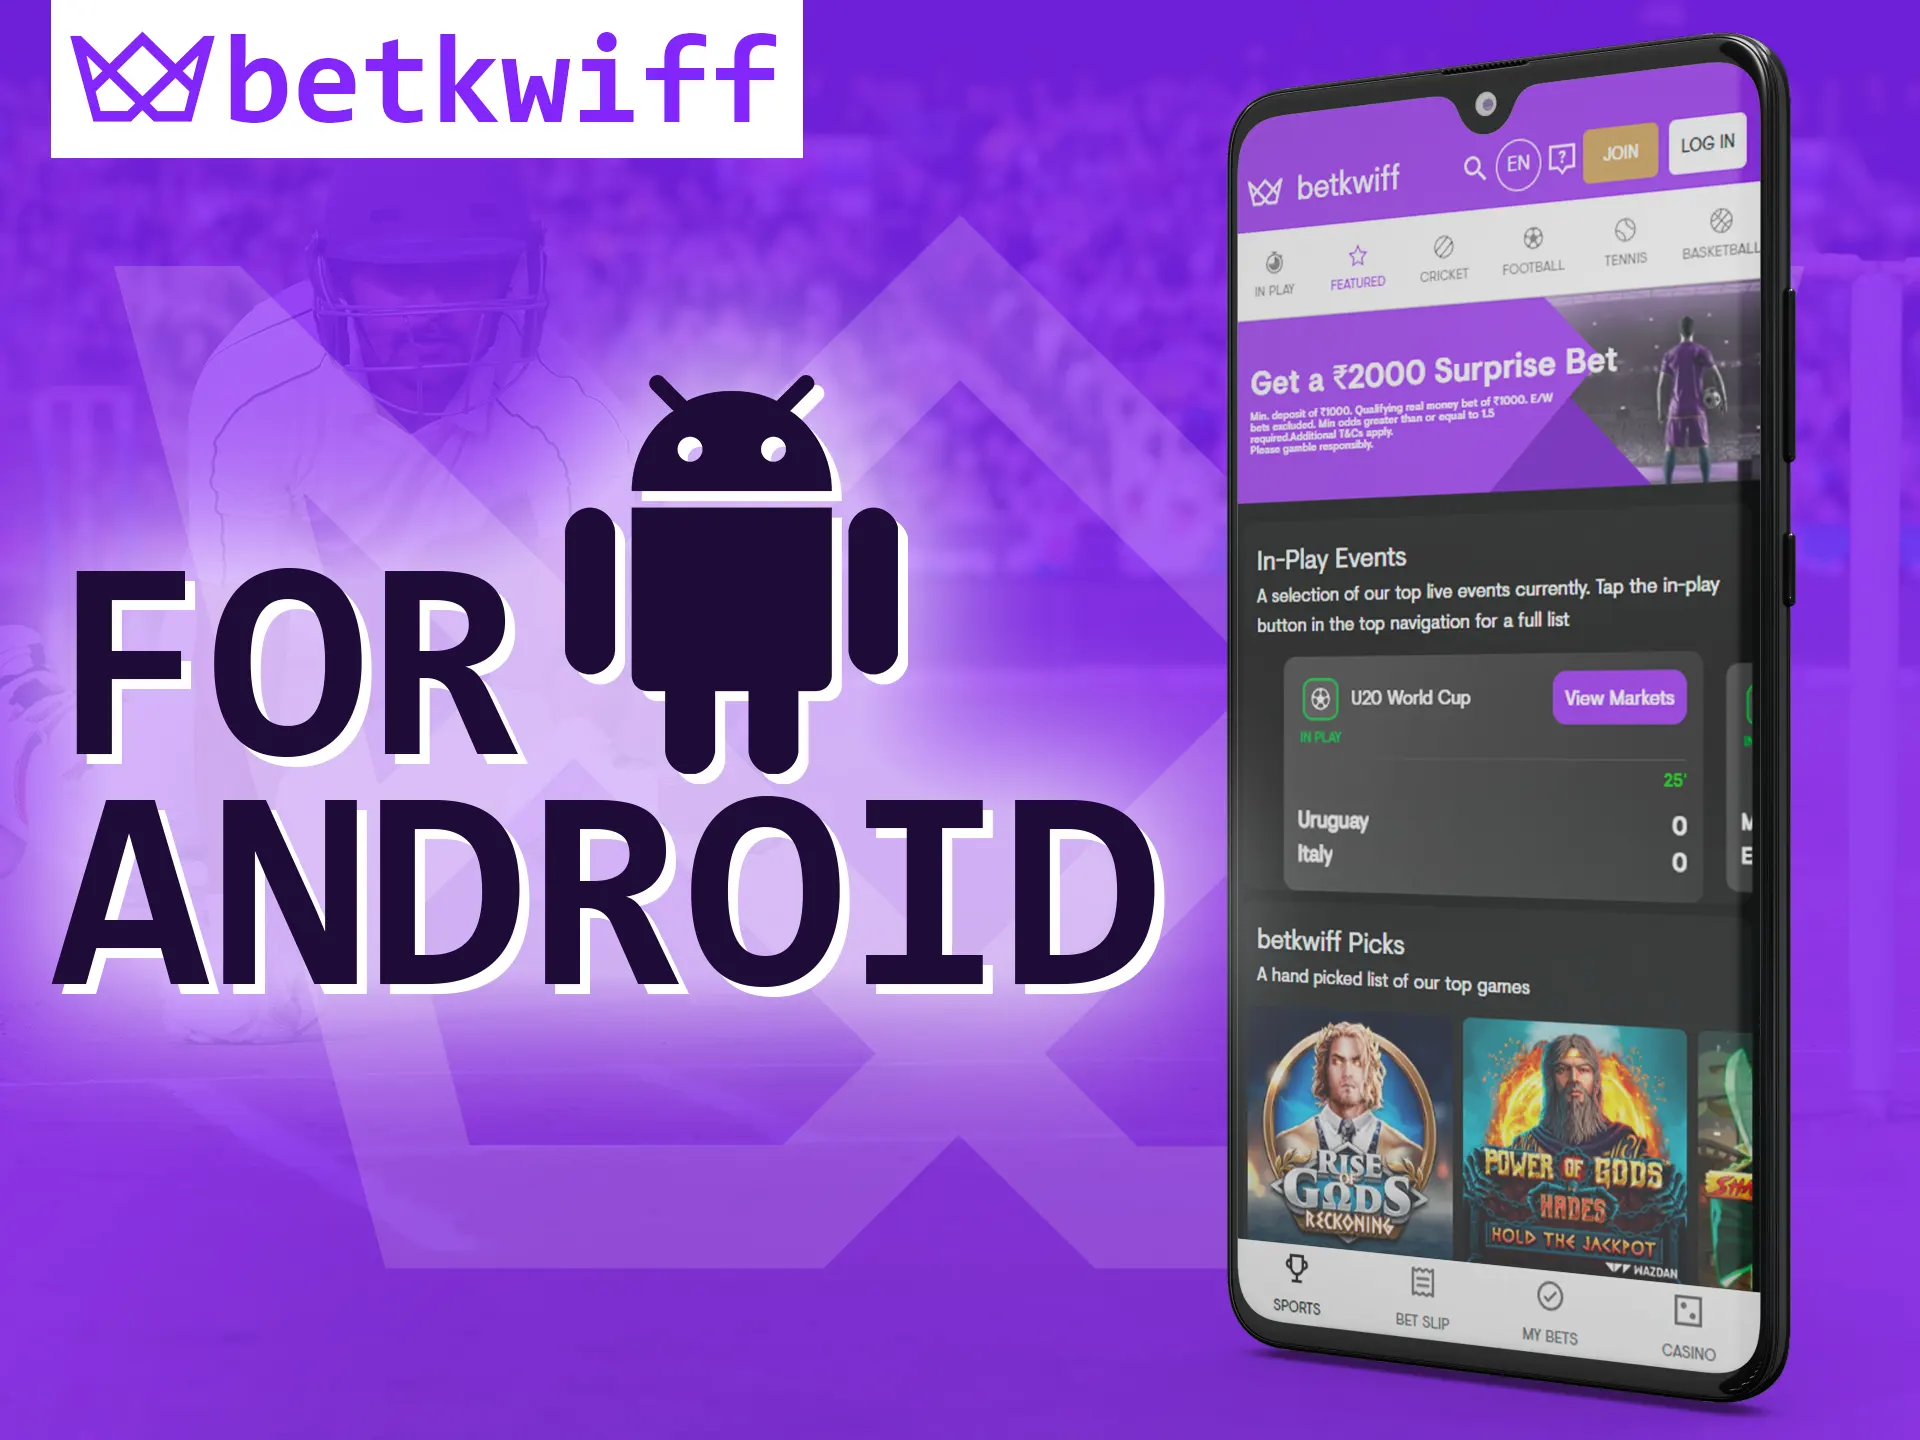 Install Betkwiff on your Android phone.